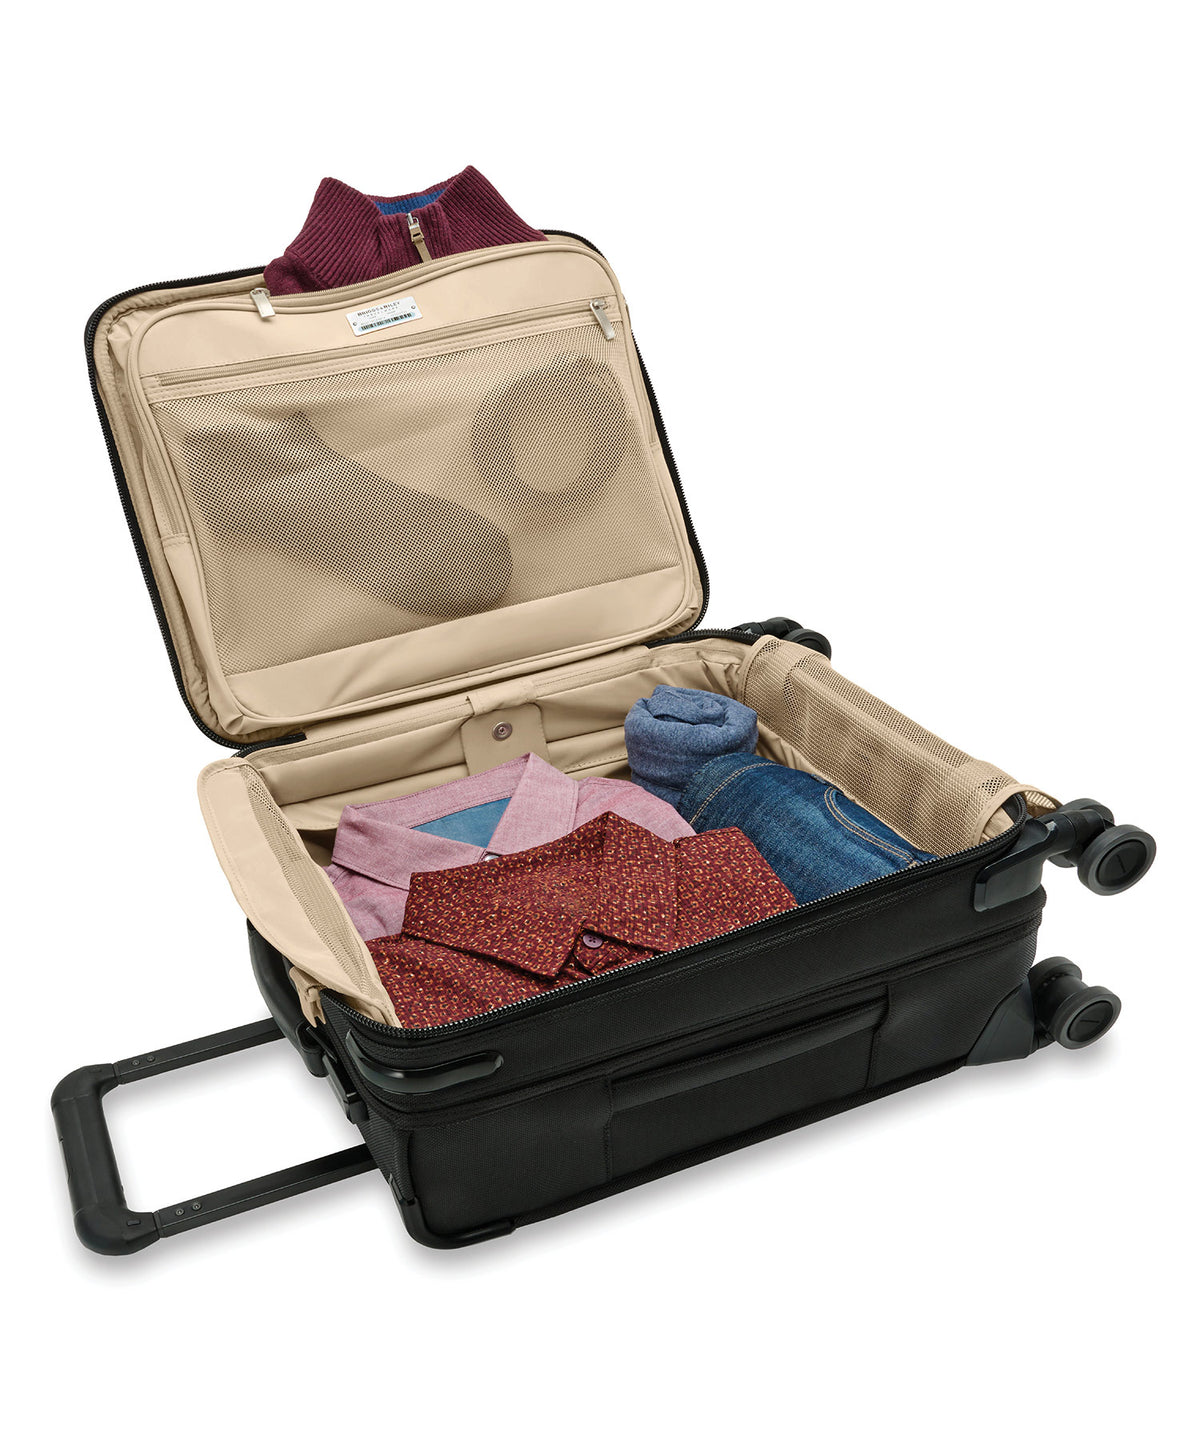 Briggs &amp; Riley Compact 19″ Carry-On Expandable Spinner